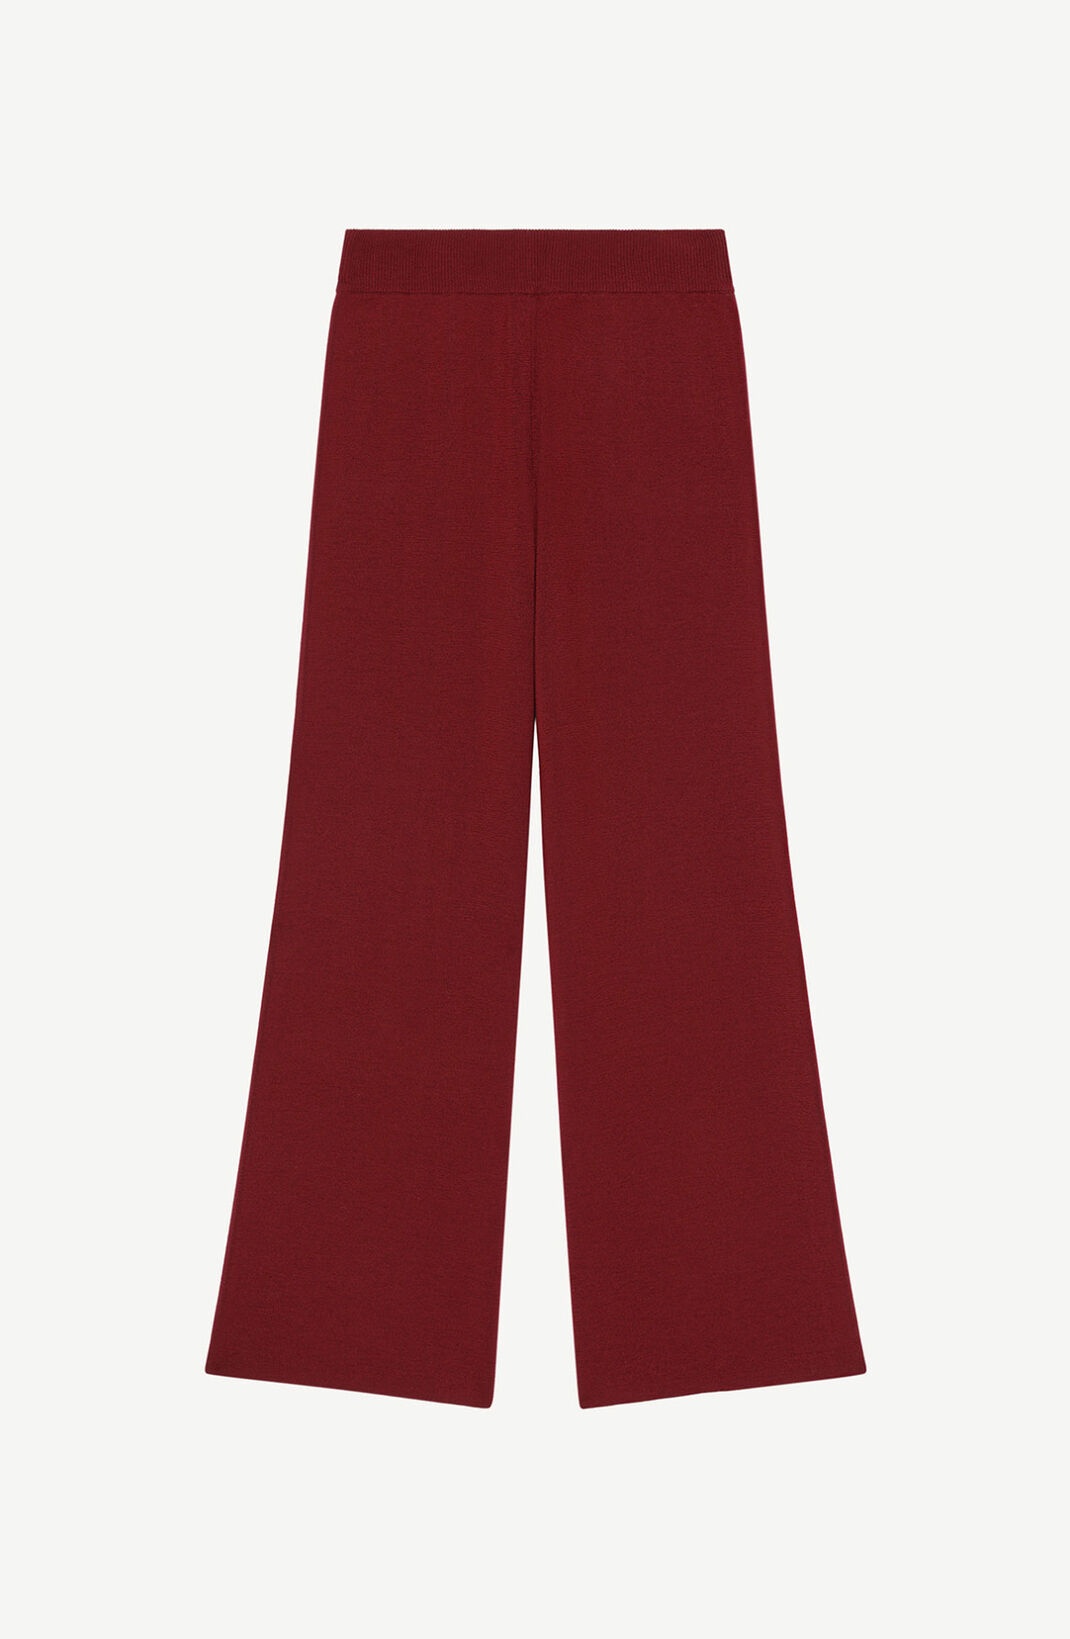 'Tiger Tail K' flared trousers - 1